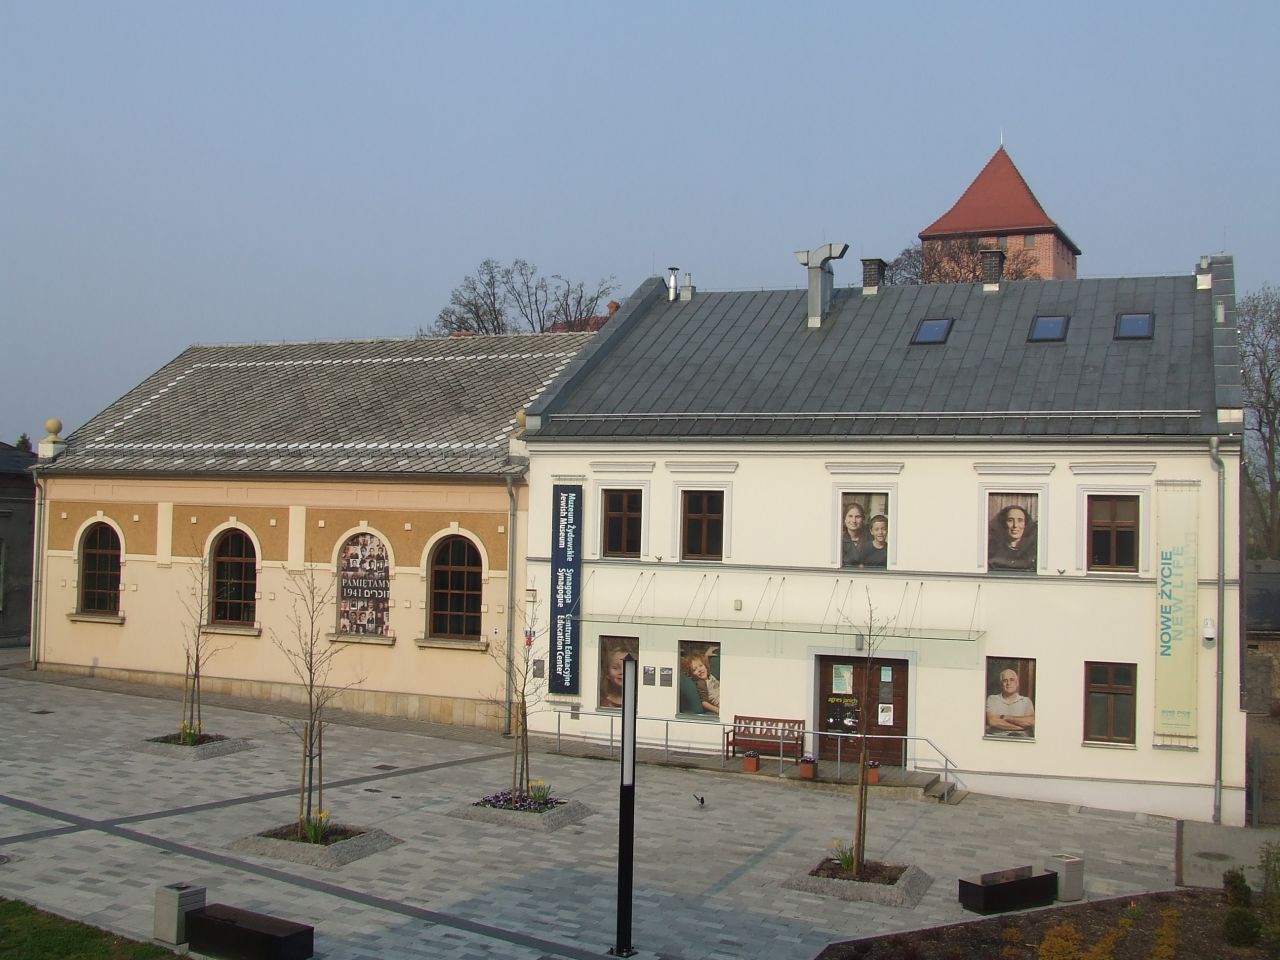 The Auschwitz Jewish Center includes a renovated, historic synagogue, a museum and an education center. It is located in the old city center of Oświęcim, a few kilometers from Auschwitz.  